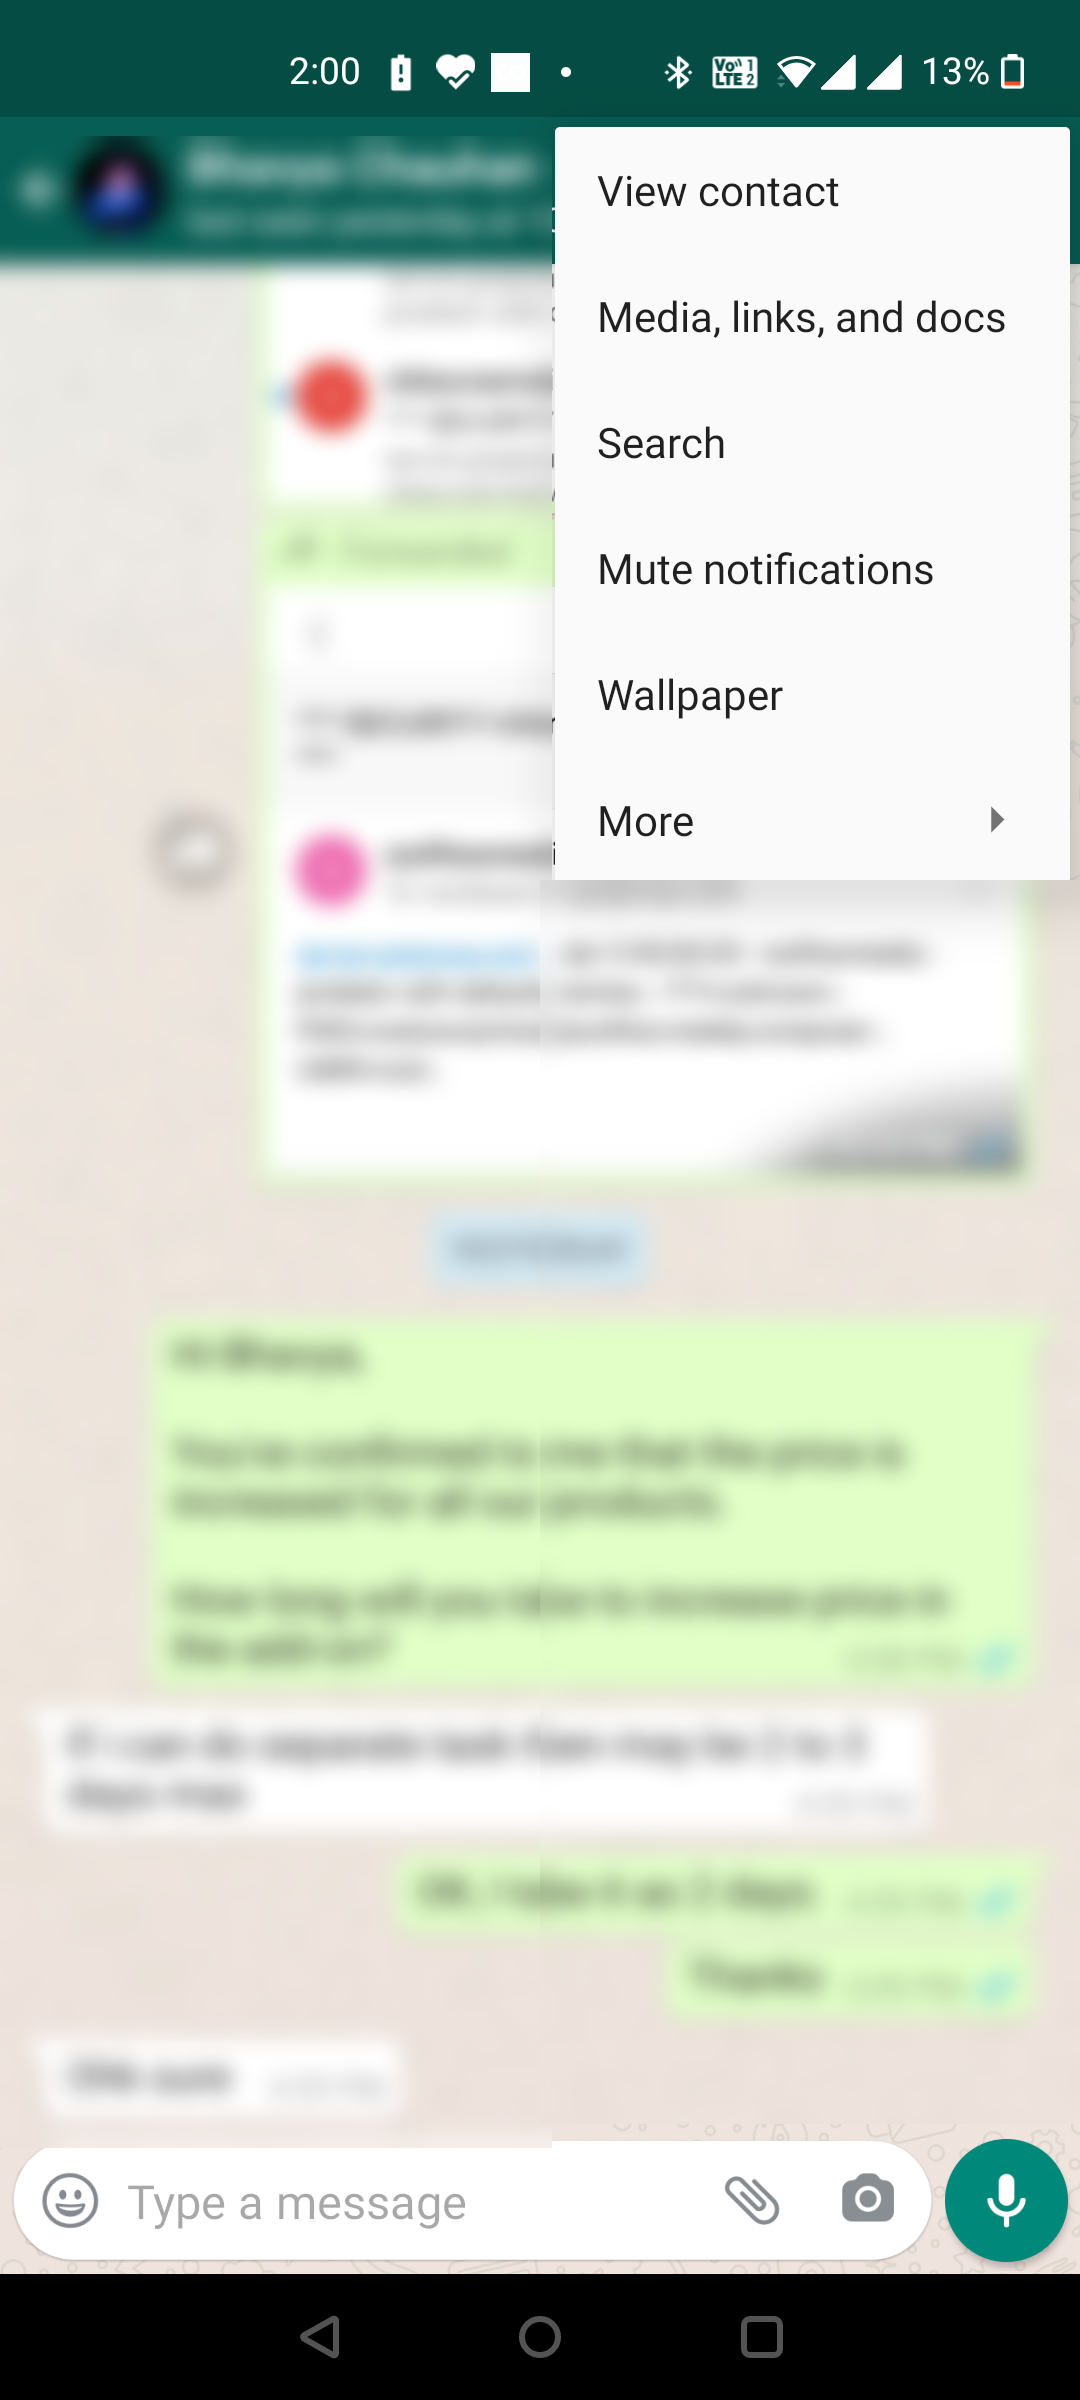 Use a custom wallpaper for specific WhatsApp chats